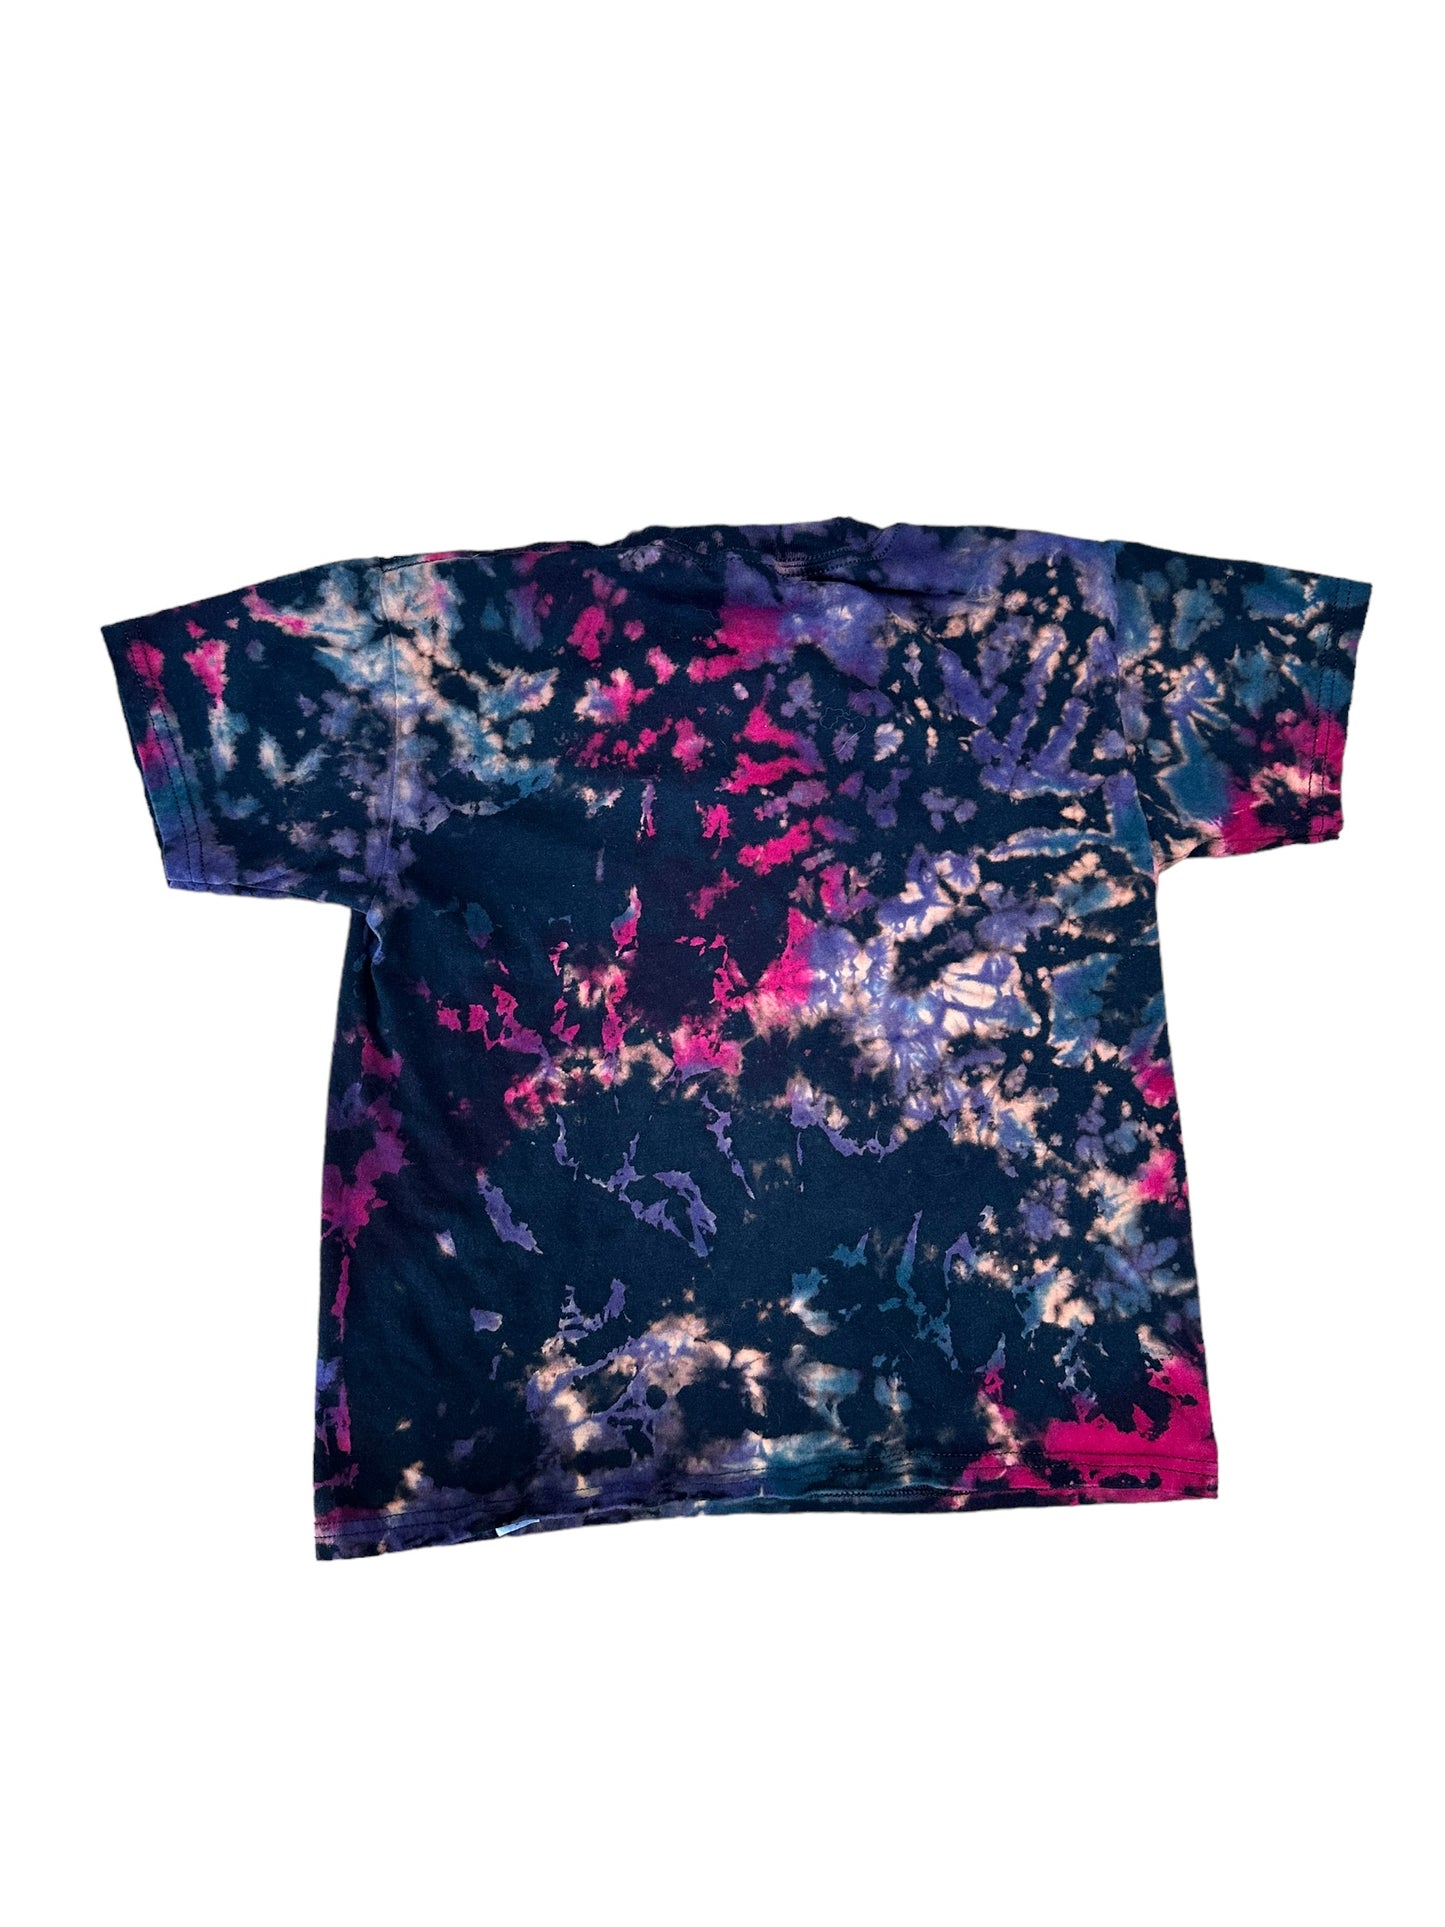 Youth Small Blue Pink and Purple Reverse Scrunch Tie Dye Shirt